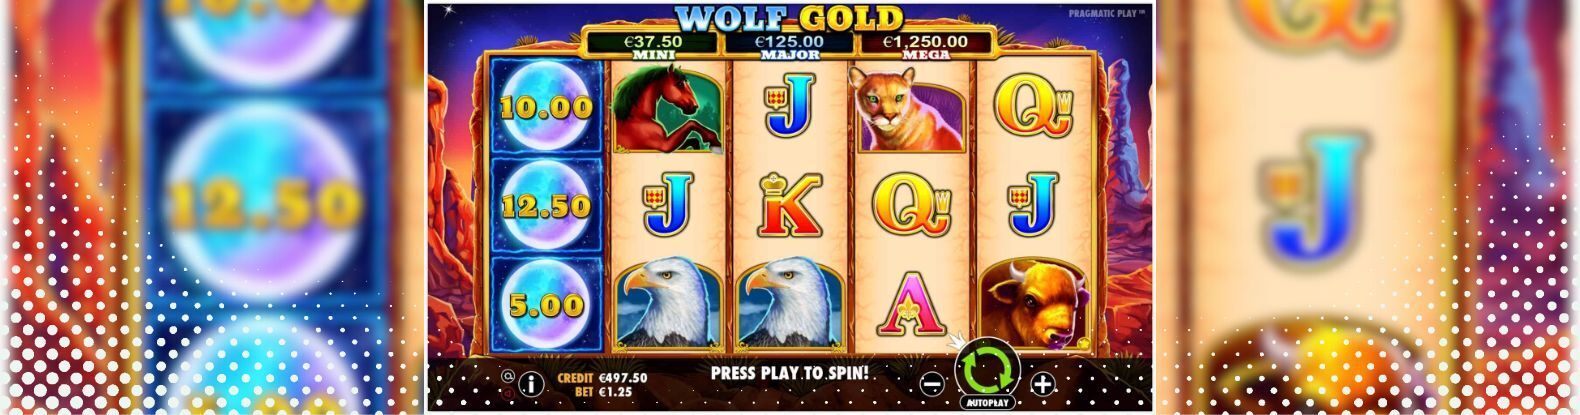 This is a screenshot of Wolf Gold Pokies Game by Pragmatic Play